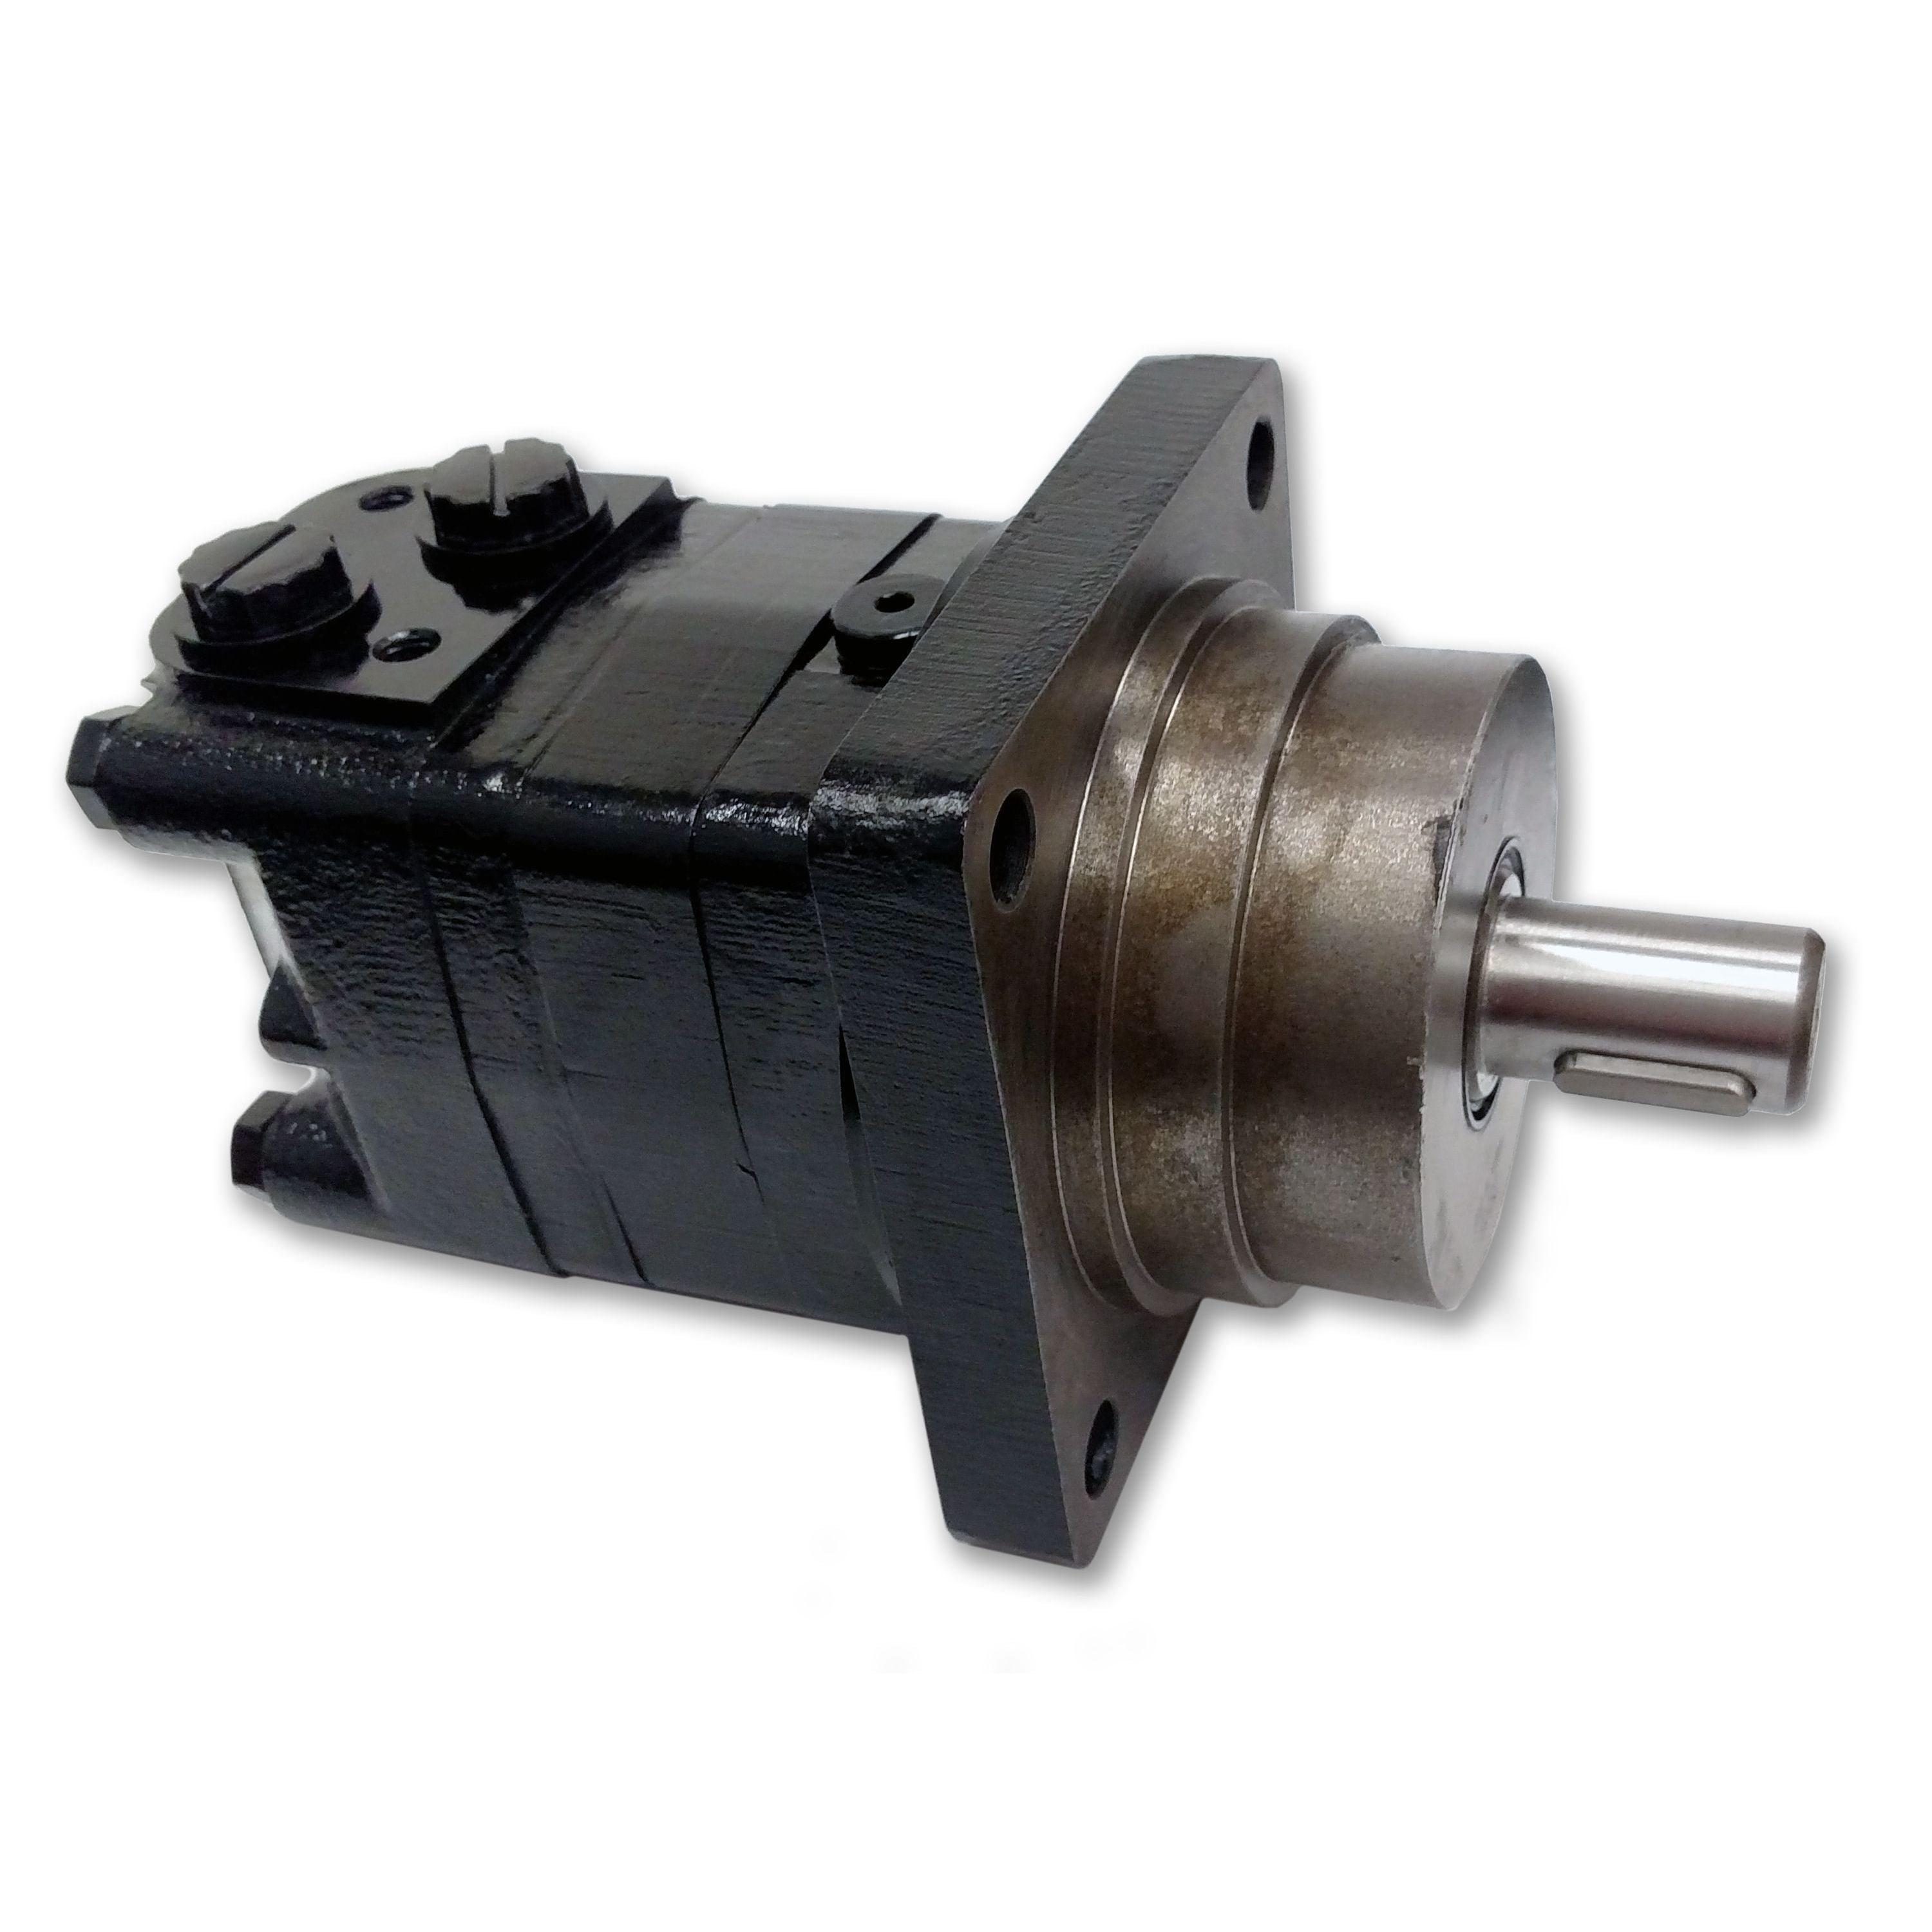 BMSY-250-WE-F-S : Dynamic LSHT Motor, 243cc, 300RPM, 6265in-lb, 2900psi Differential, 19.81GPM, Wheel Mount, 14-Tooth, 12/24 Pitch Shaft, Side Ported, #10 SAE (5/8")